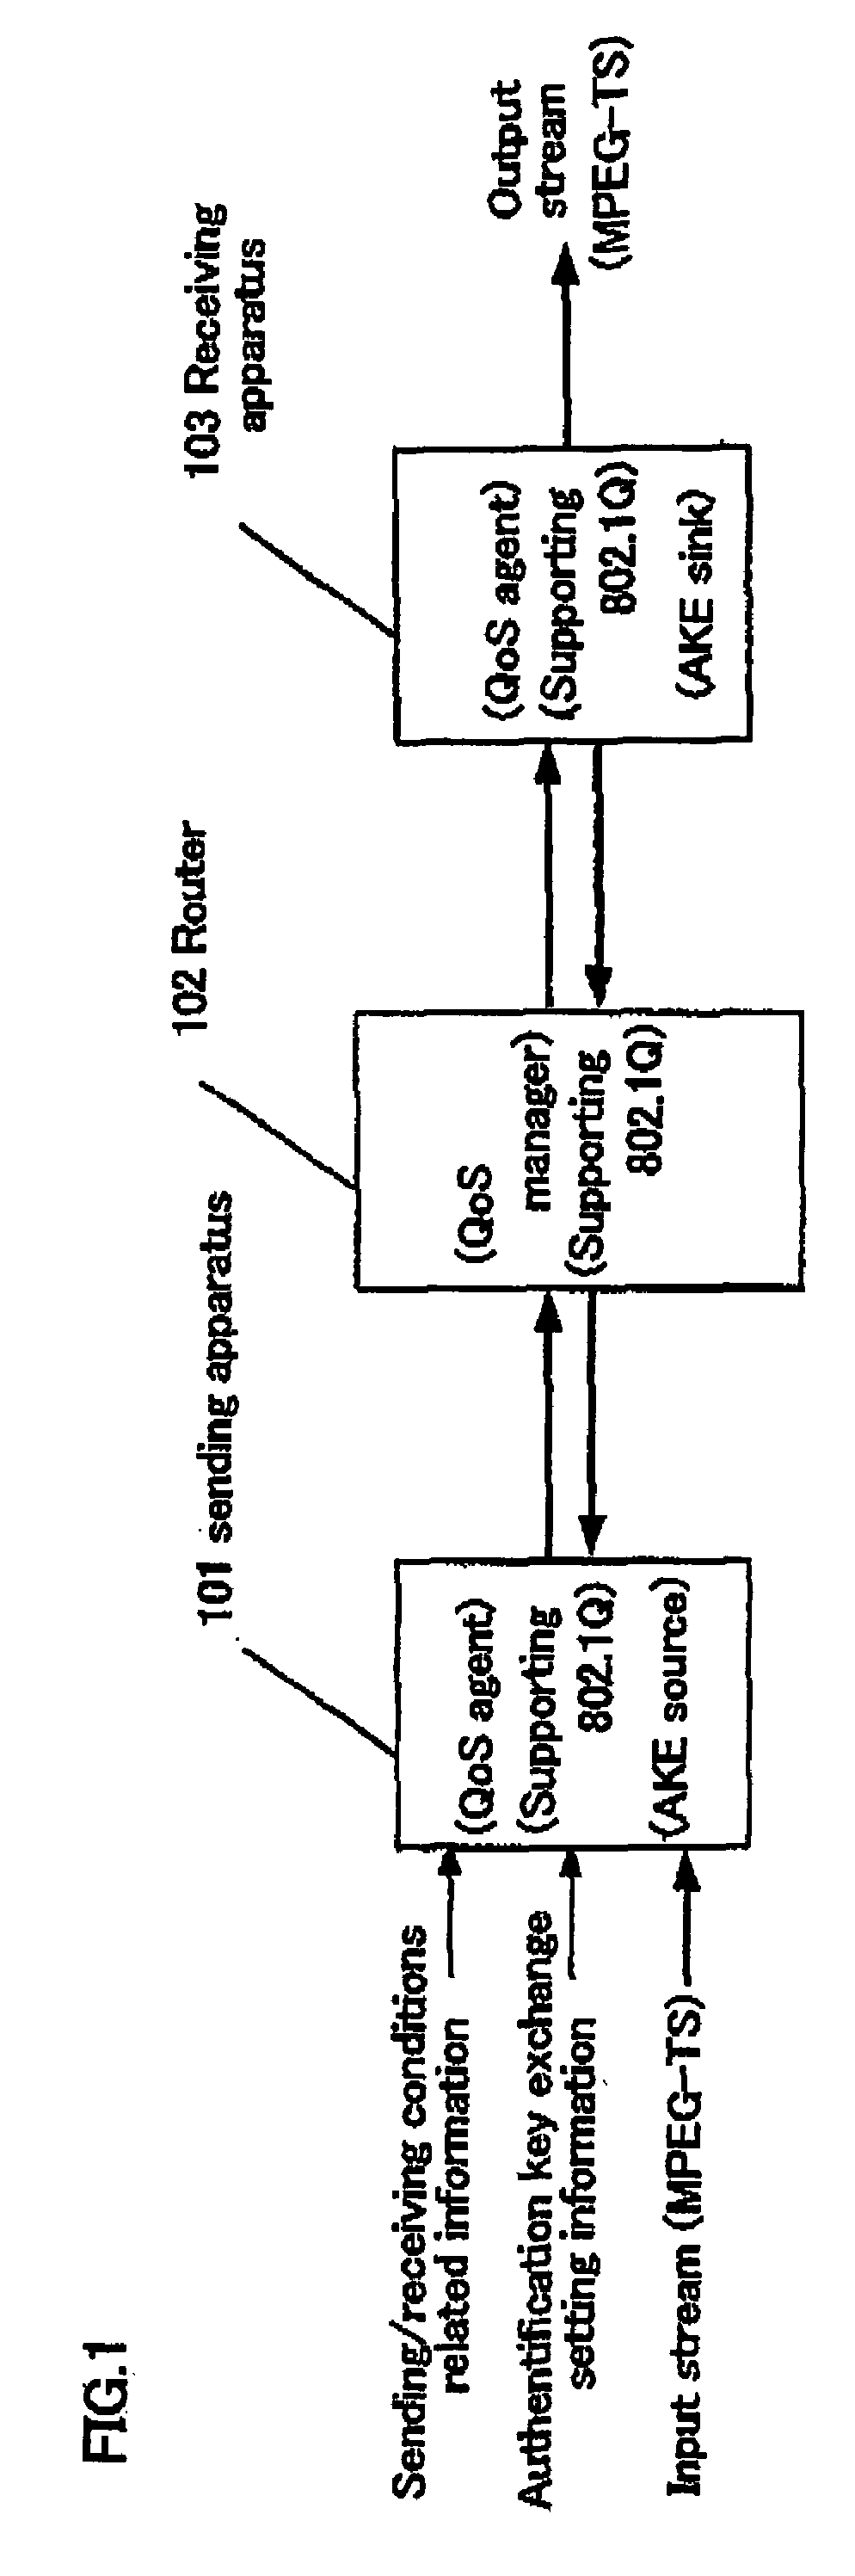 Packet transmission/reception device